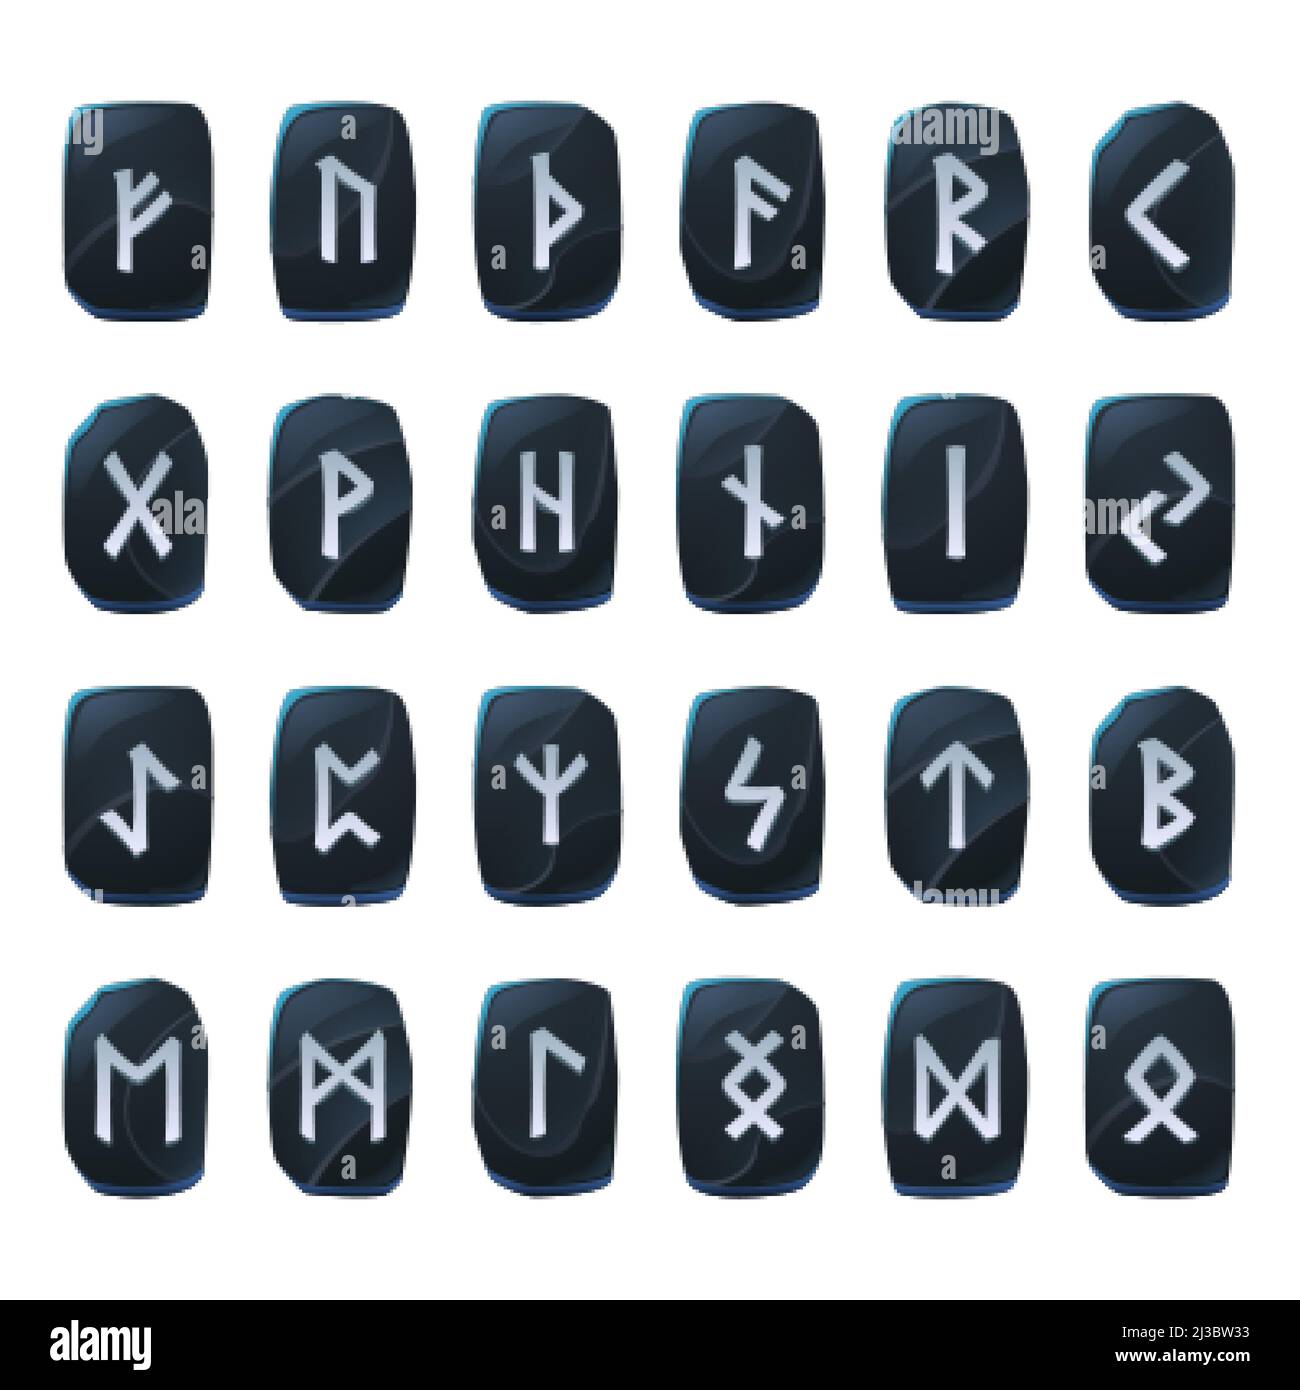 Set of onyx game runes, nordic ancient alphabet, viking celtic futark symbols engraved on black stone pieces. Esoteric occult signs, mystic ui or gui Stock Vector